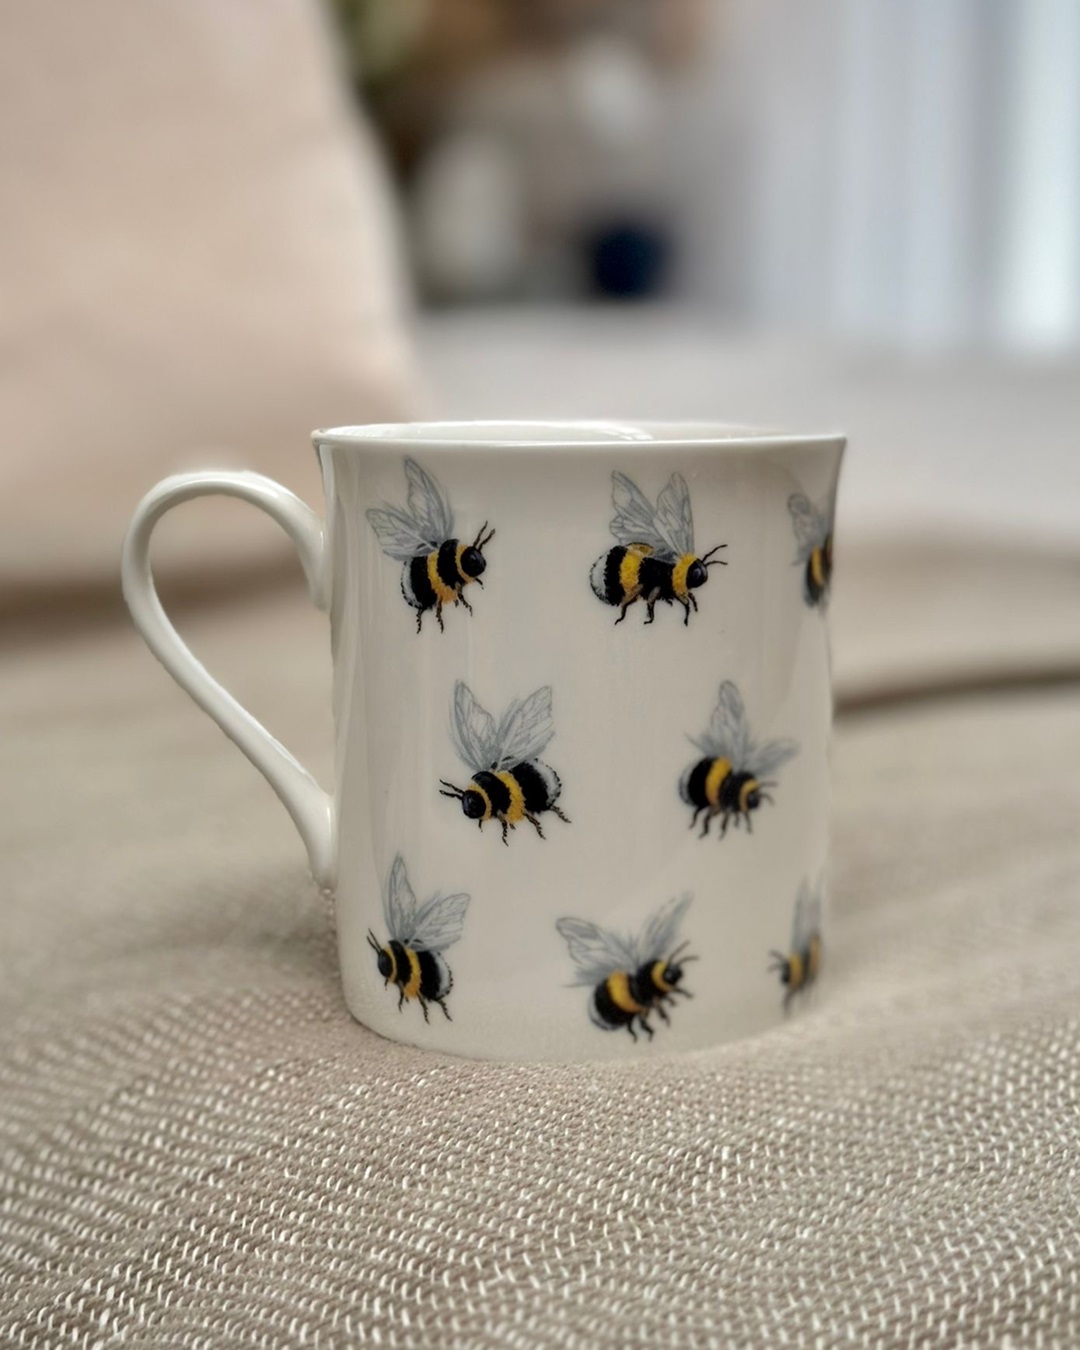 White cup with bumble bees on it